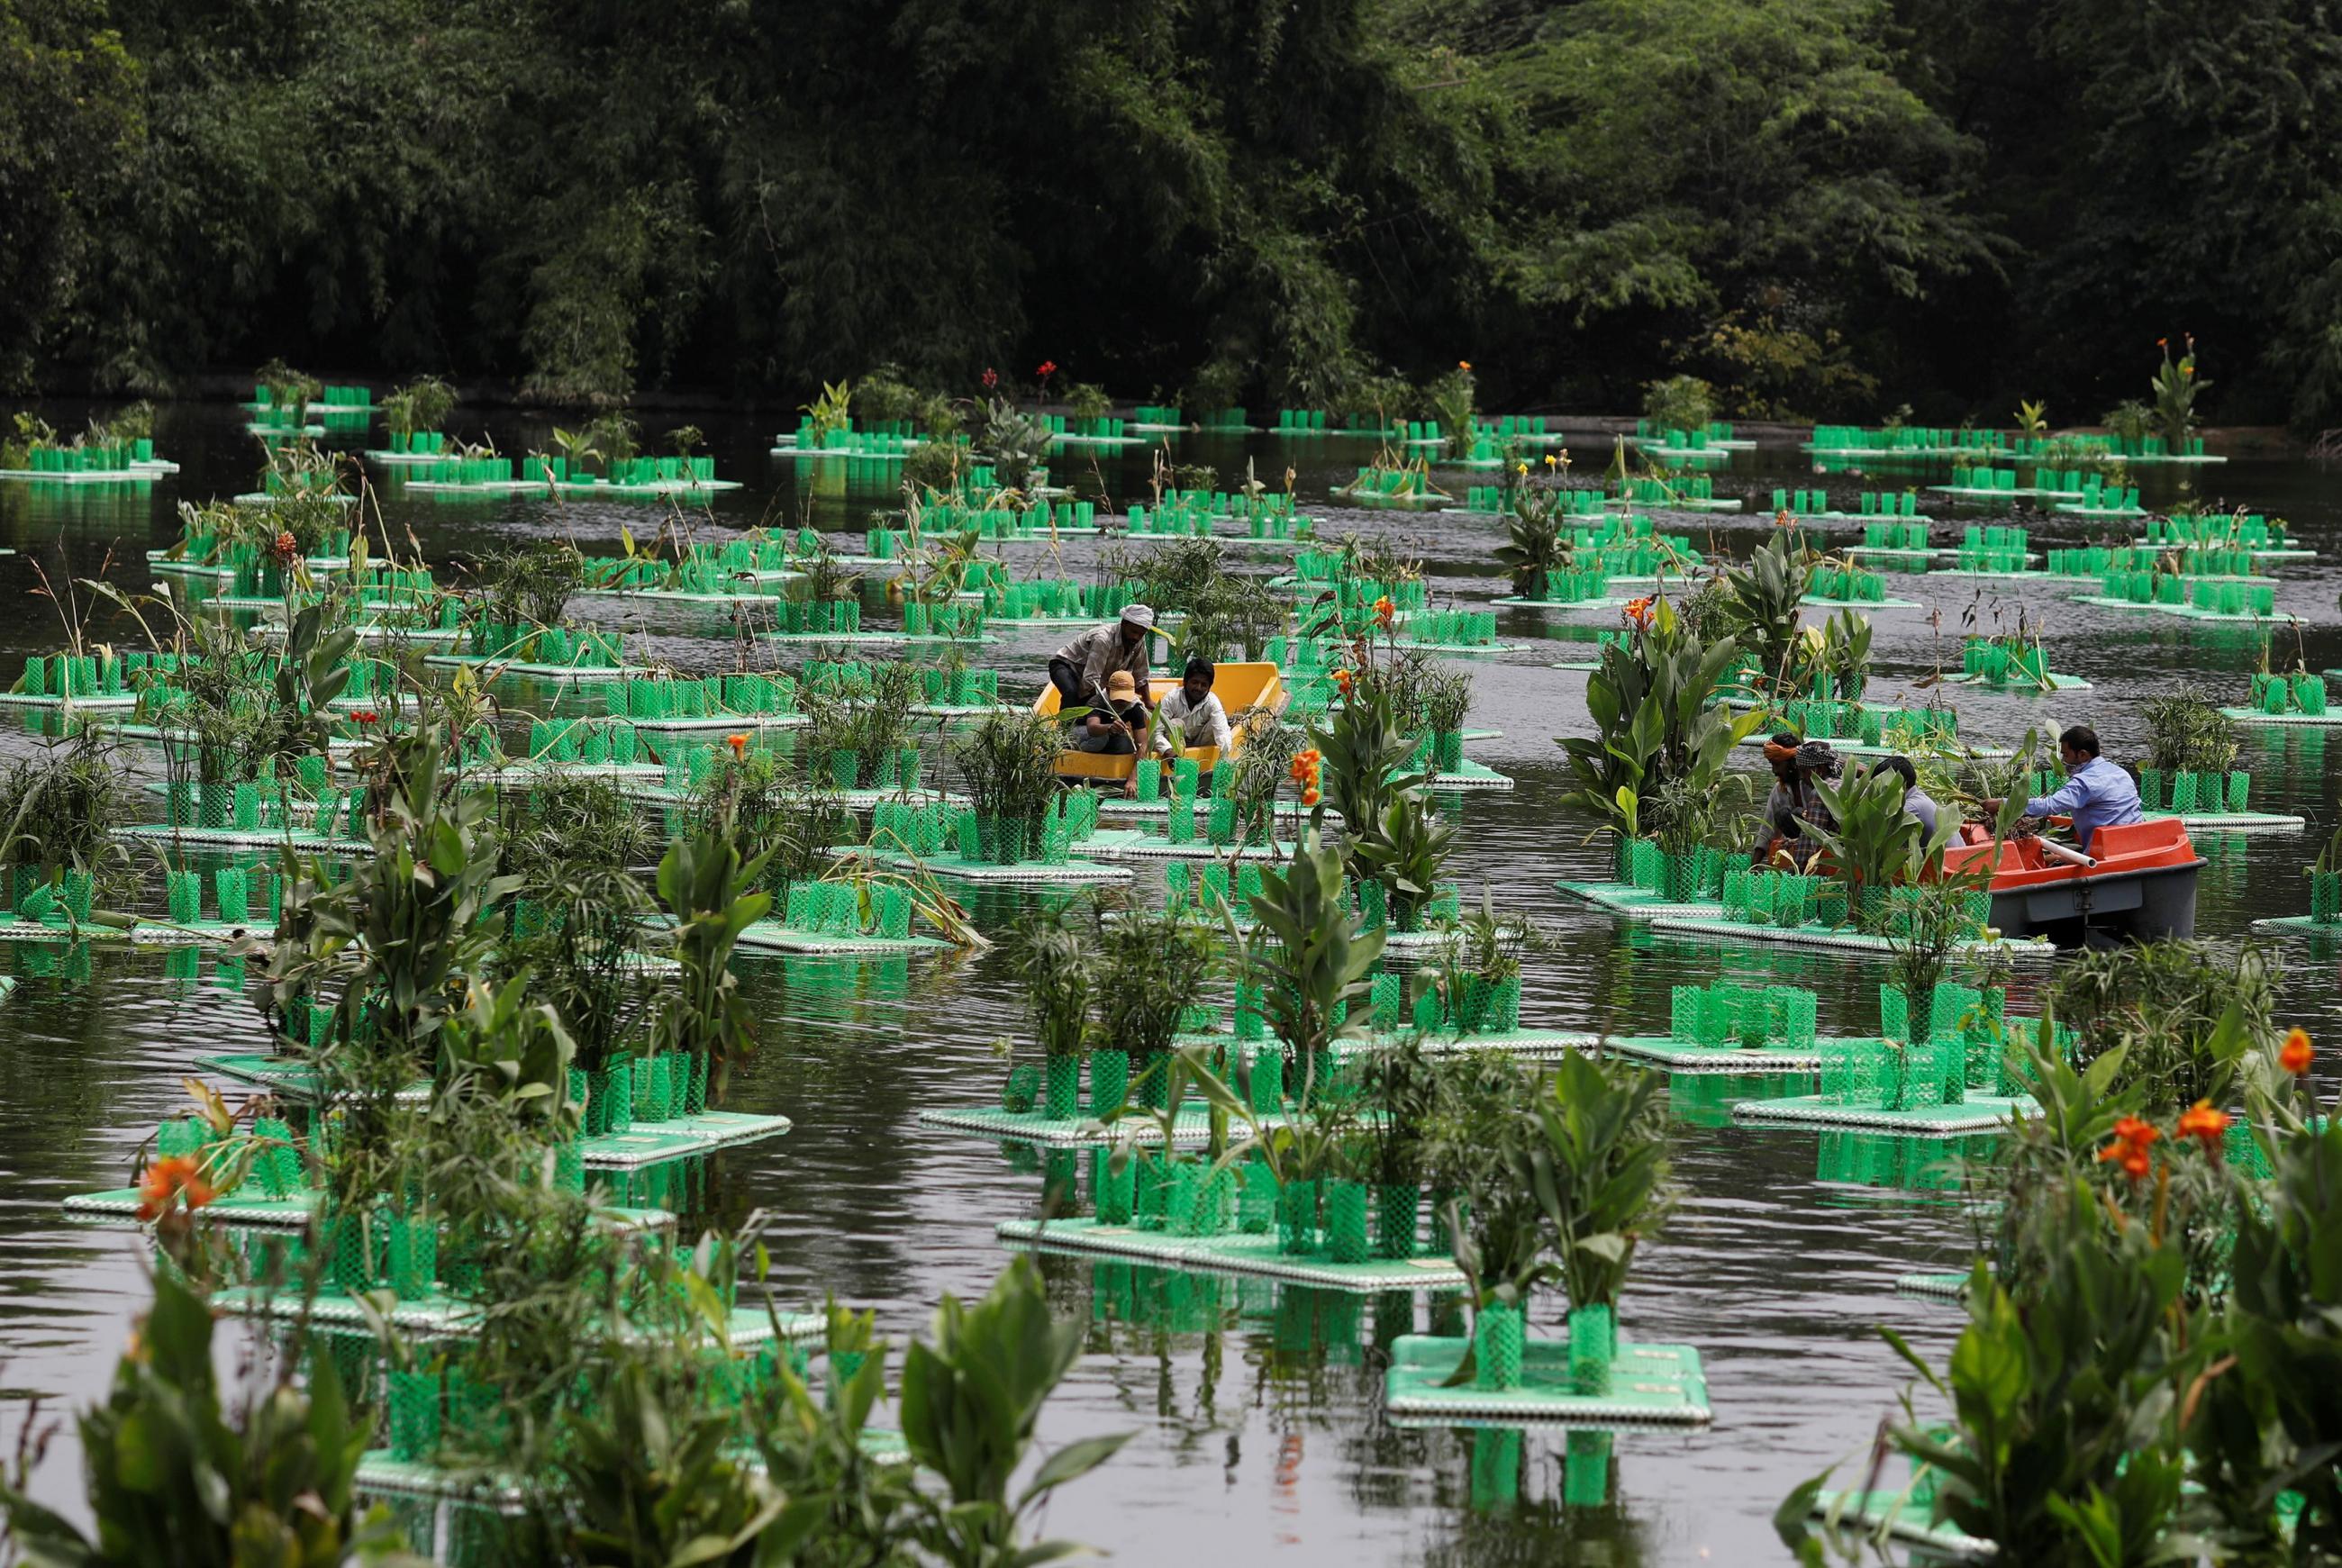 Workers remove damaged plants from a newly set-up "floating wetland" on Sanjay Van Lake to clean its water in New Delhi, India, on August 26, 2021. 